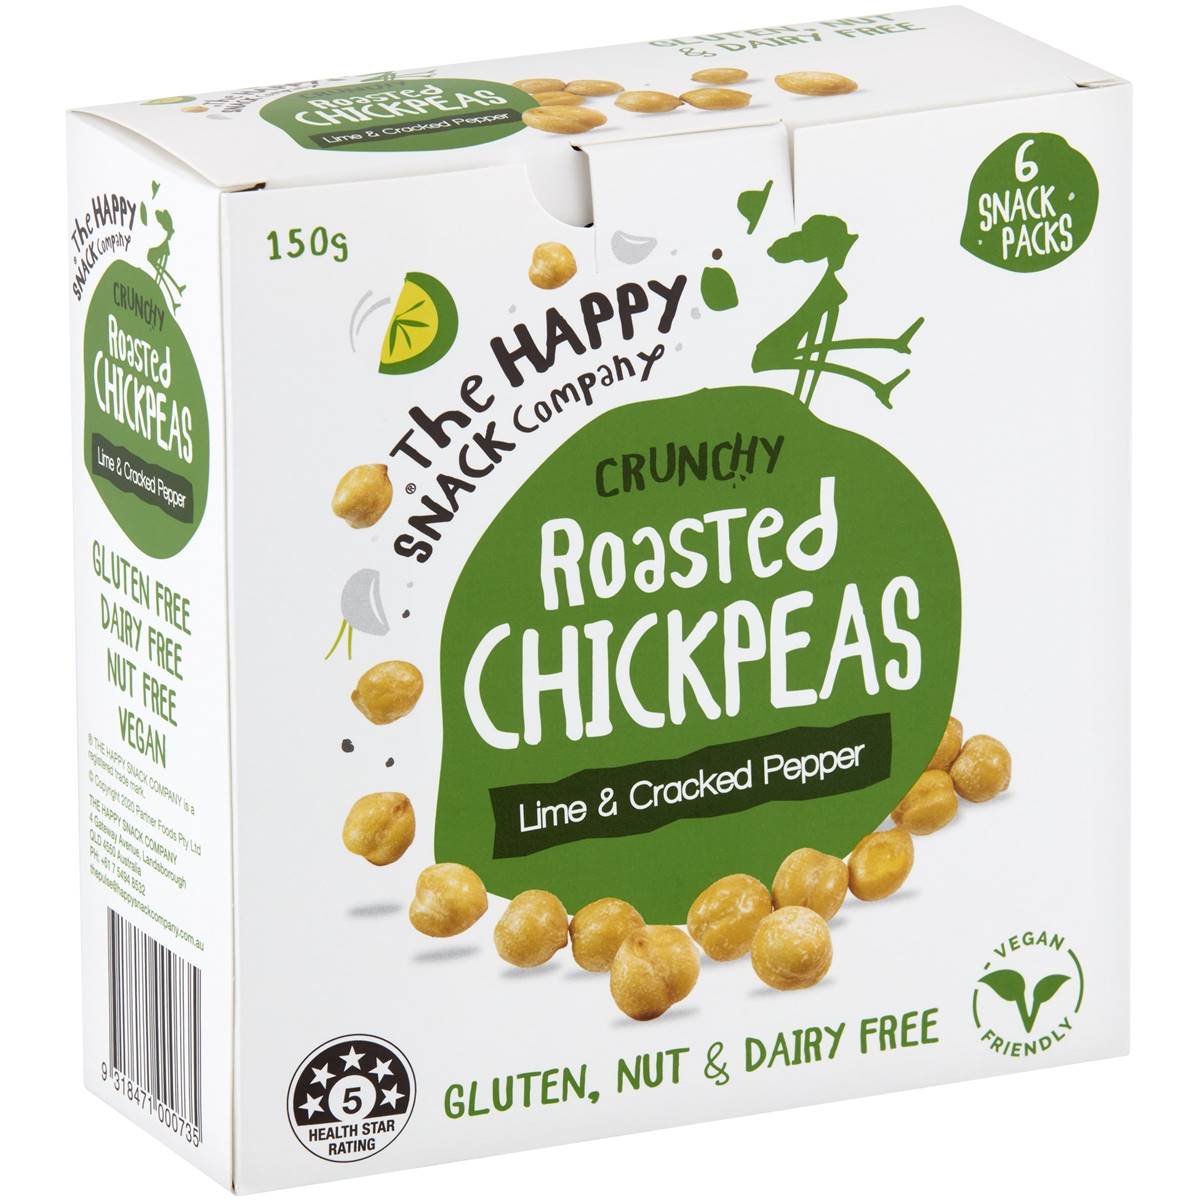 Calories in The Happy Snack Company Crunchy Roasted Chickpeas Lime & Cracked Pepper